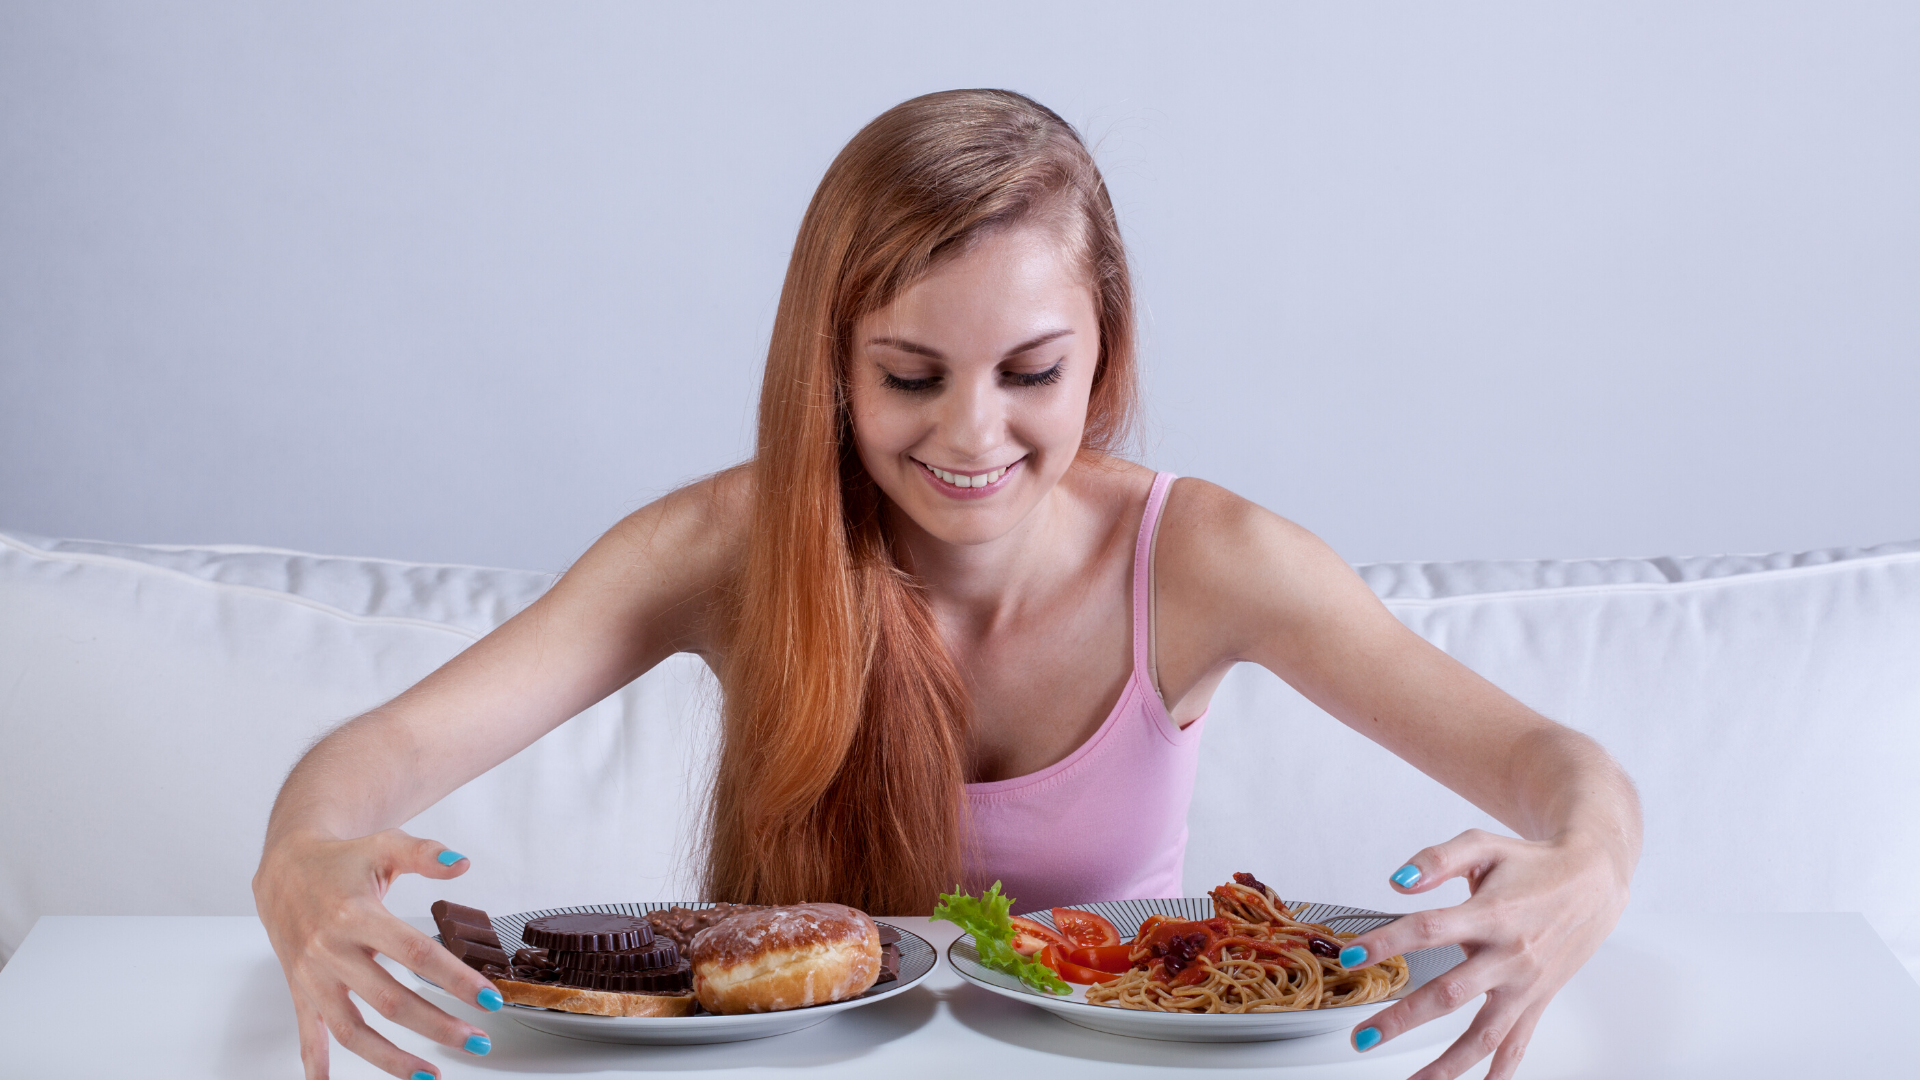 People are often under this misconception that the intuitive eating approach is just perpetuating obesity and unhealthy lifestyles, and just causing people to eat nothing but 